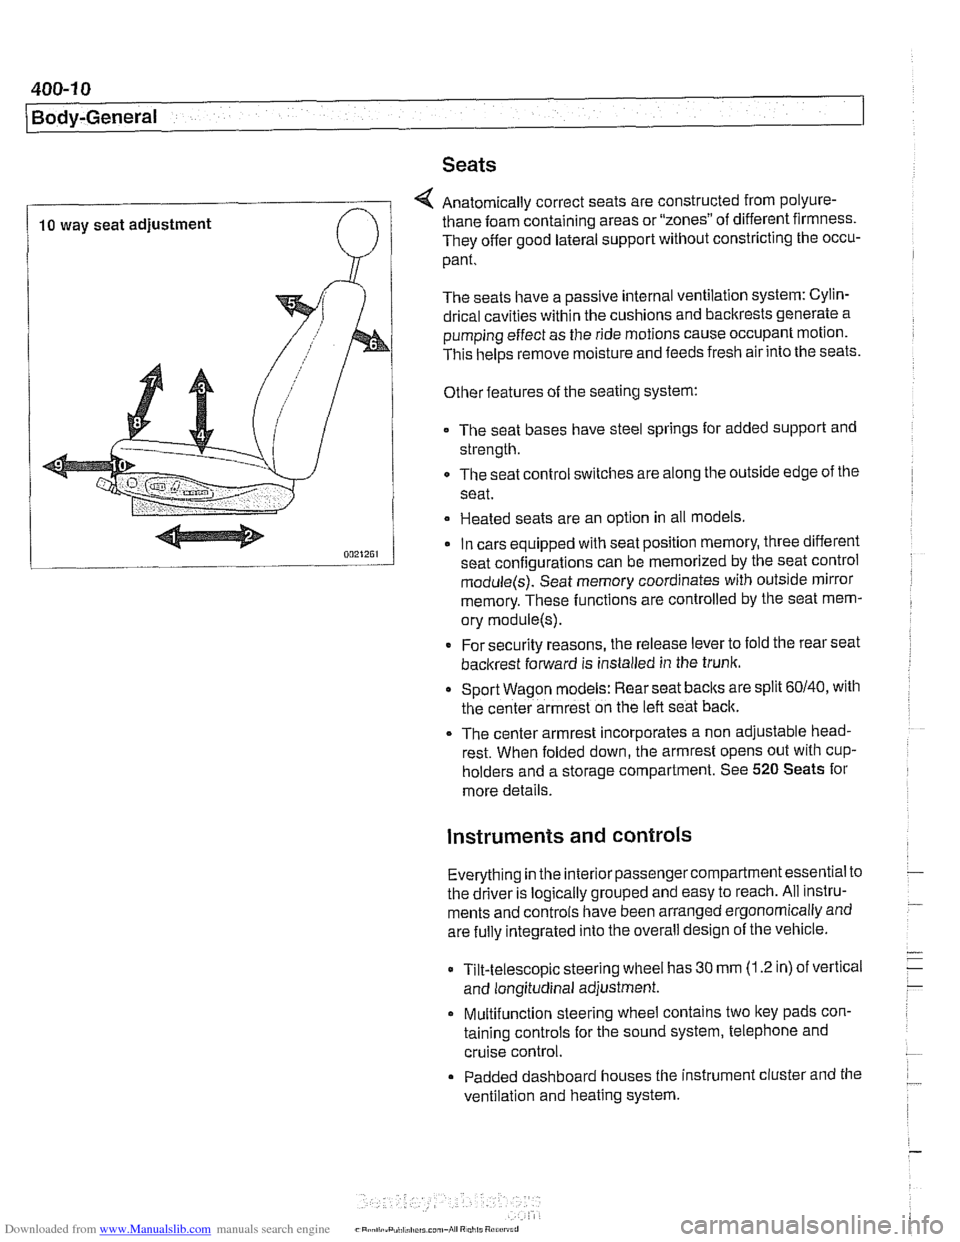 BMW 525i 2001 E39 Workshop Manual Downloaded from www.Manualslib.com manuals search engine 
400-1 0 
Body-General 
Seats 
4 Anatomically correct seats are constructed  from polyure- 
10 way seat  adjustment  thane foam 
containing are